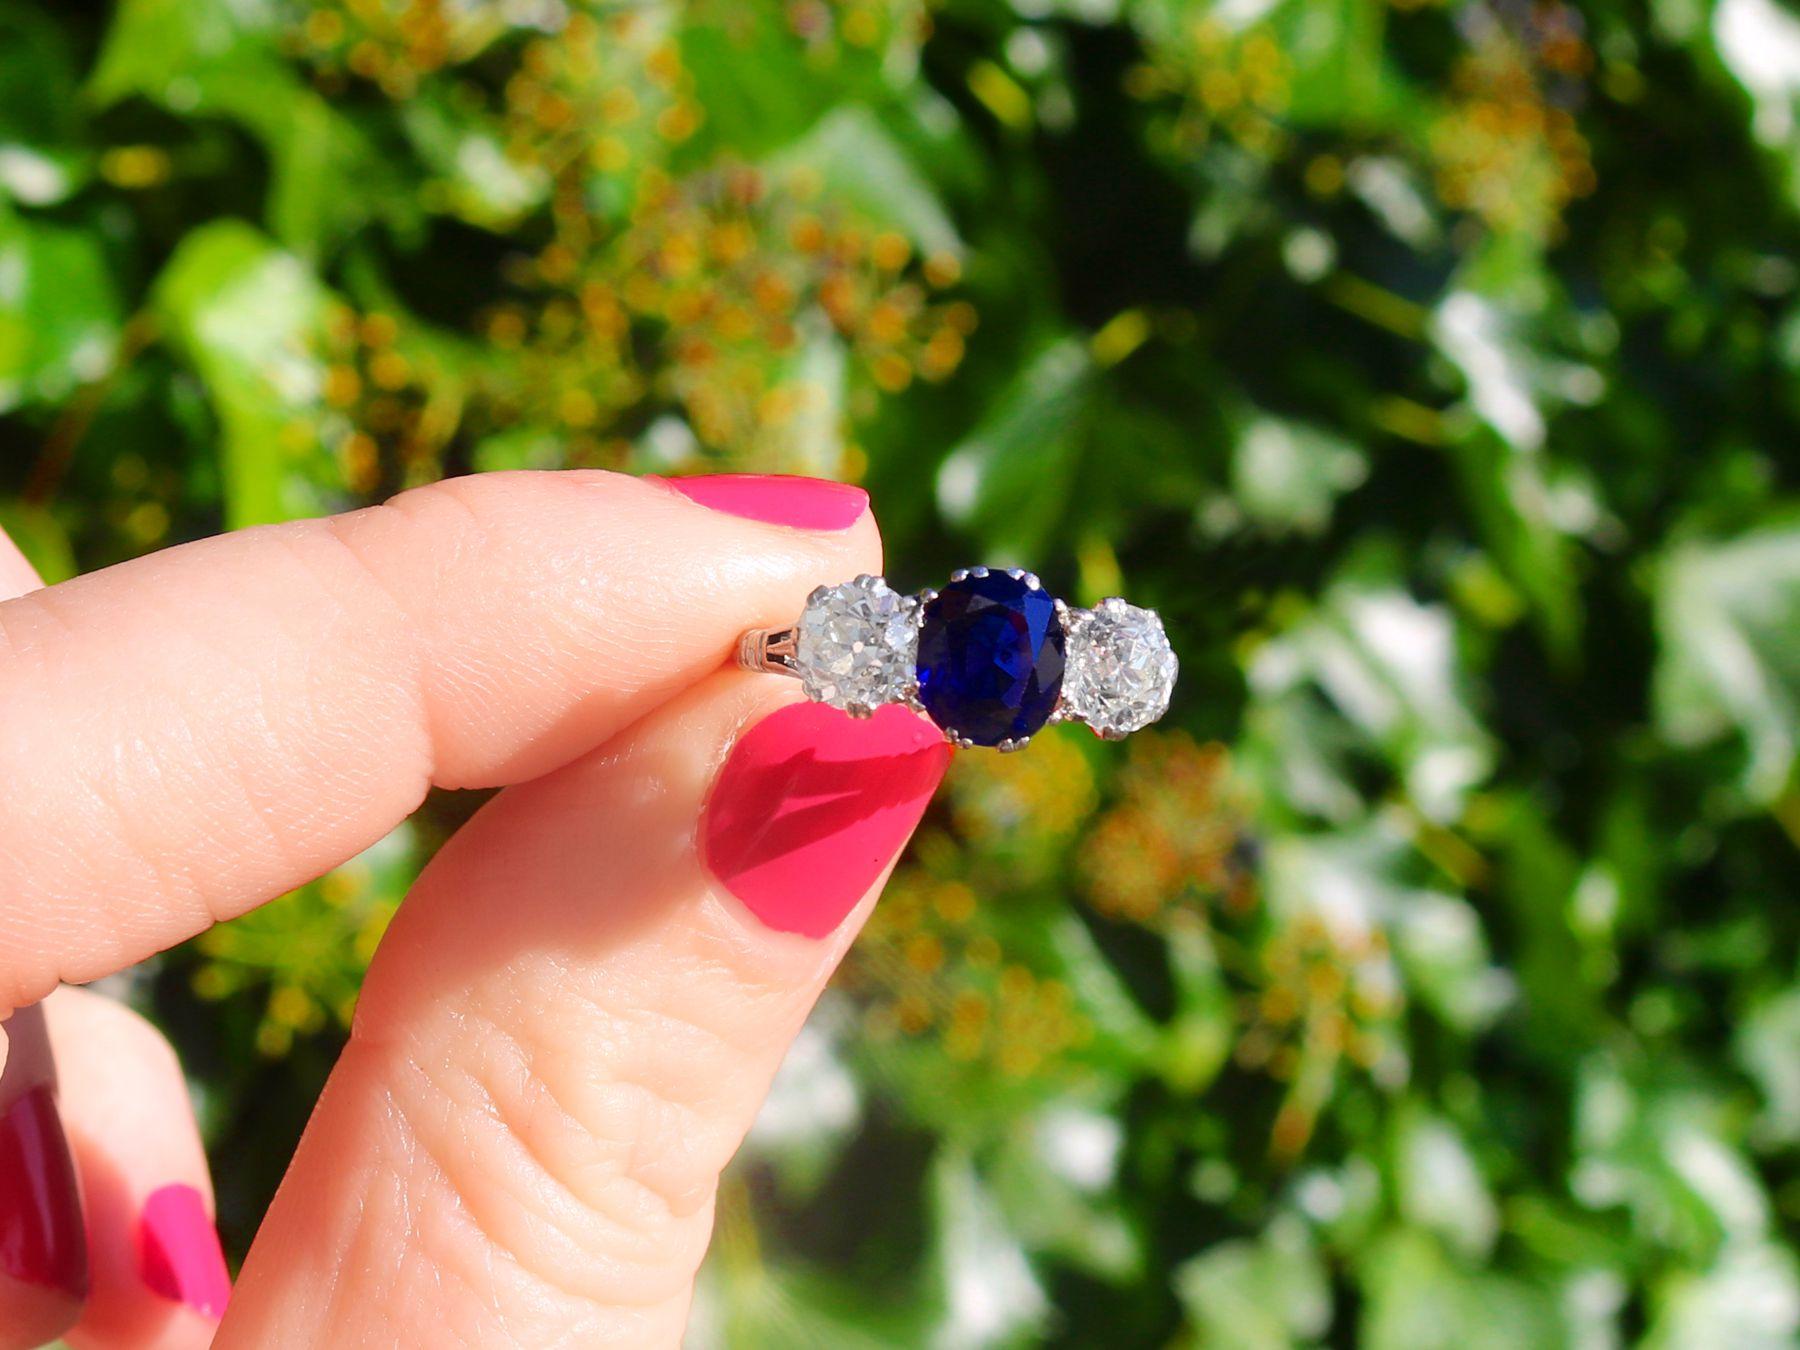 A stunning, fine and impressive vintage 1.40 carat Burmese sapphire and 1.38 carat diamond, palladium trilogy ring; part of our diverse sapphire jewelry and estate jewelry collections.

This stunning, fine and impressive sapphire ring has been